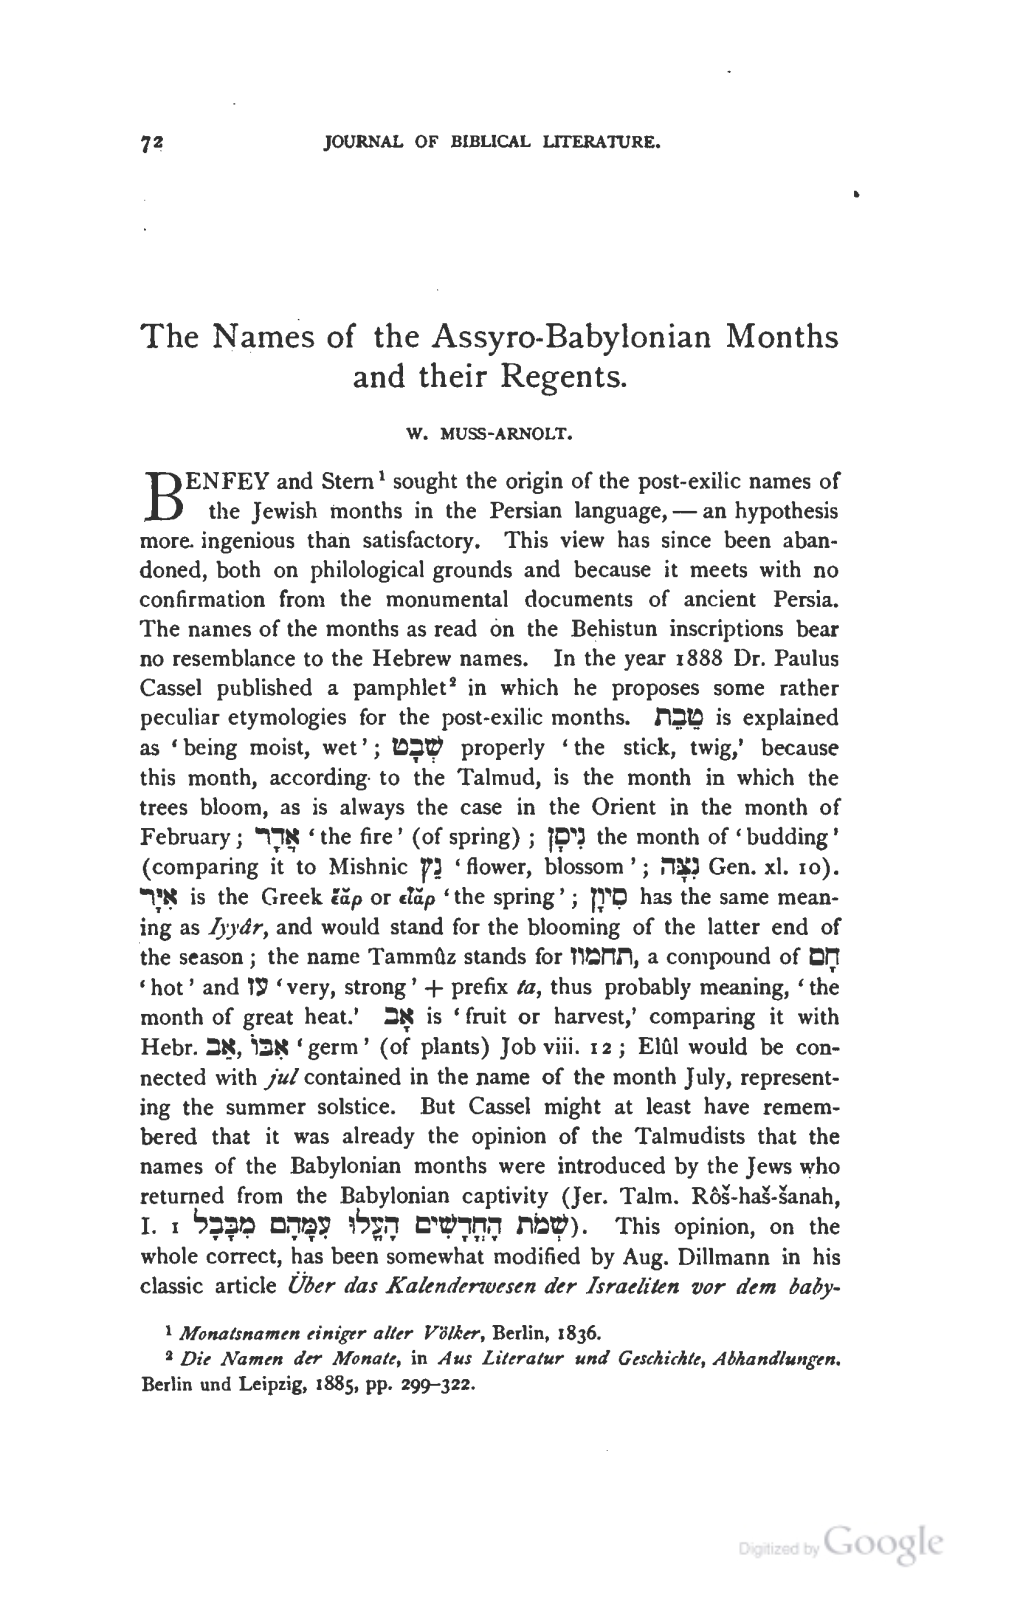 The Names of the Assyro-Babylonian Months and Their Regents